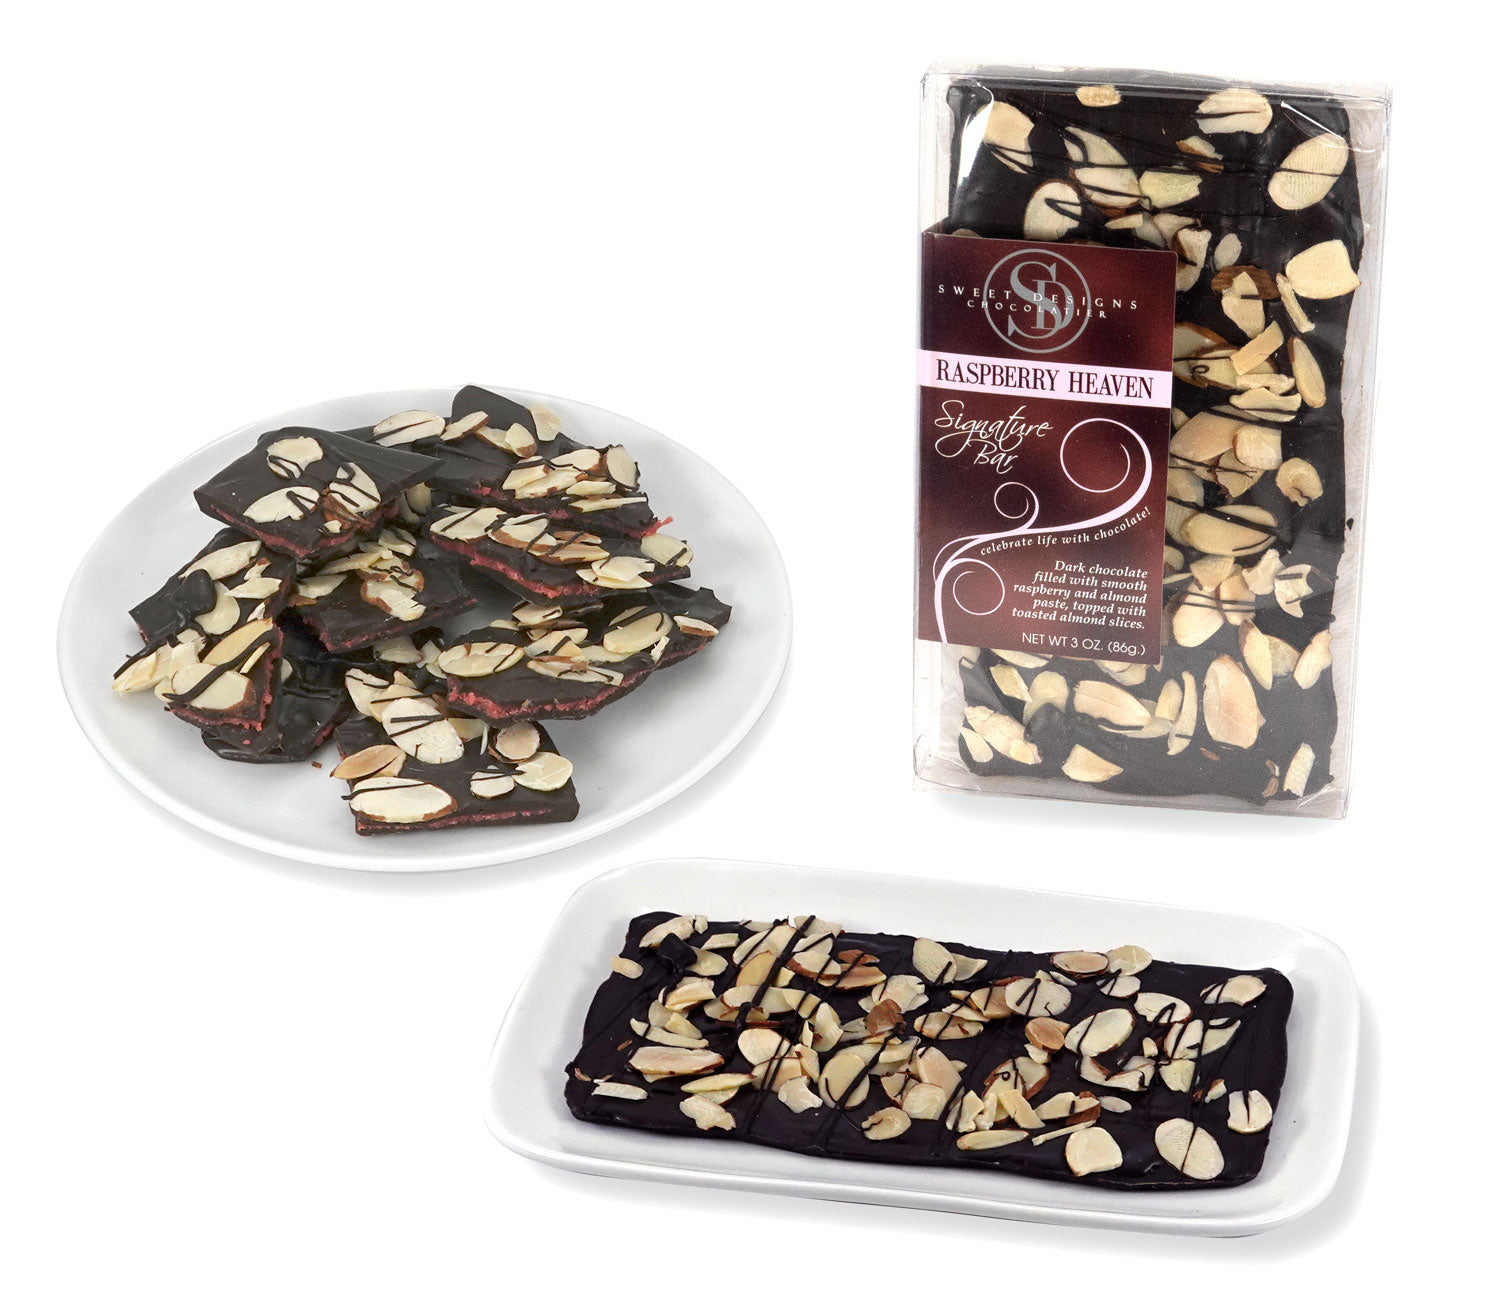 Chocolate bar with raspberry filling, topped with almonds